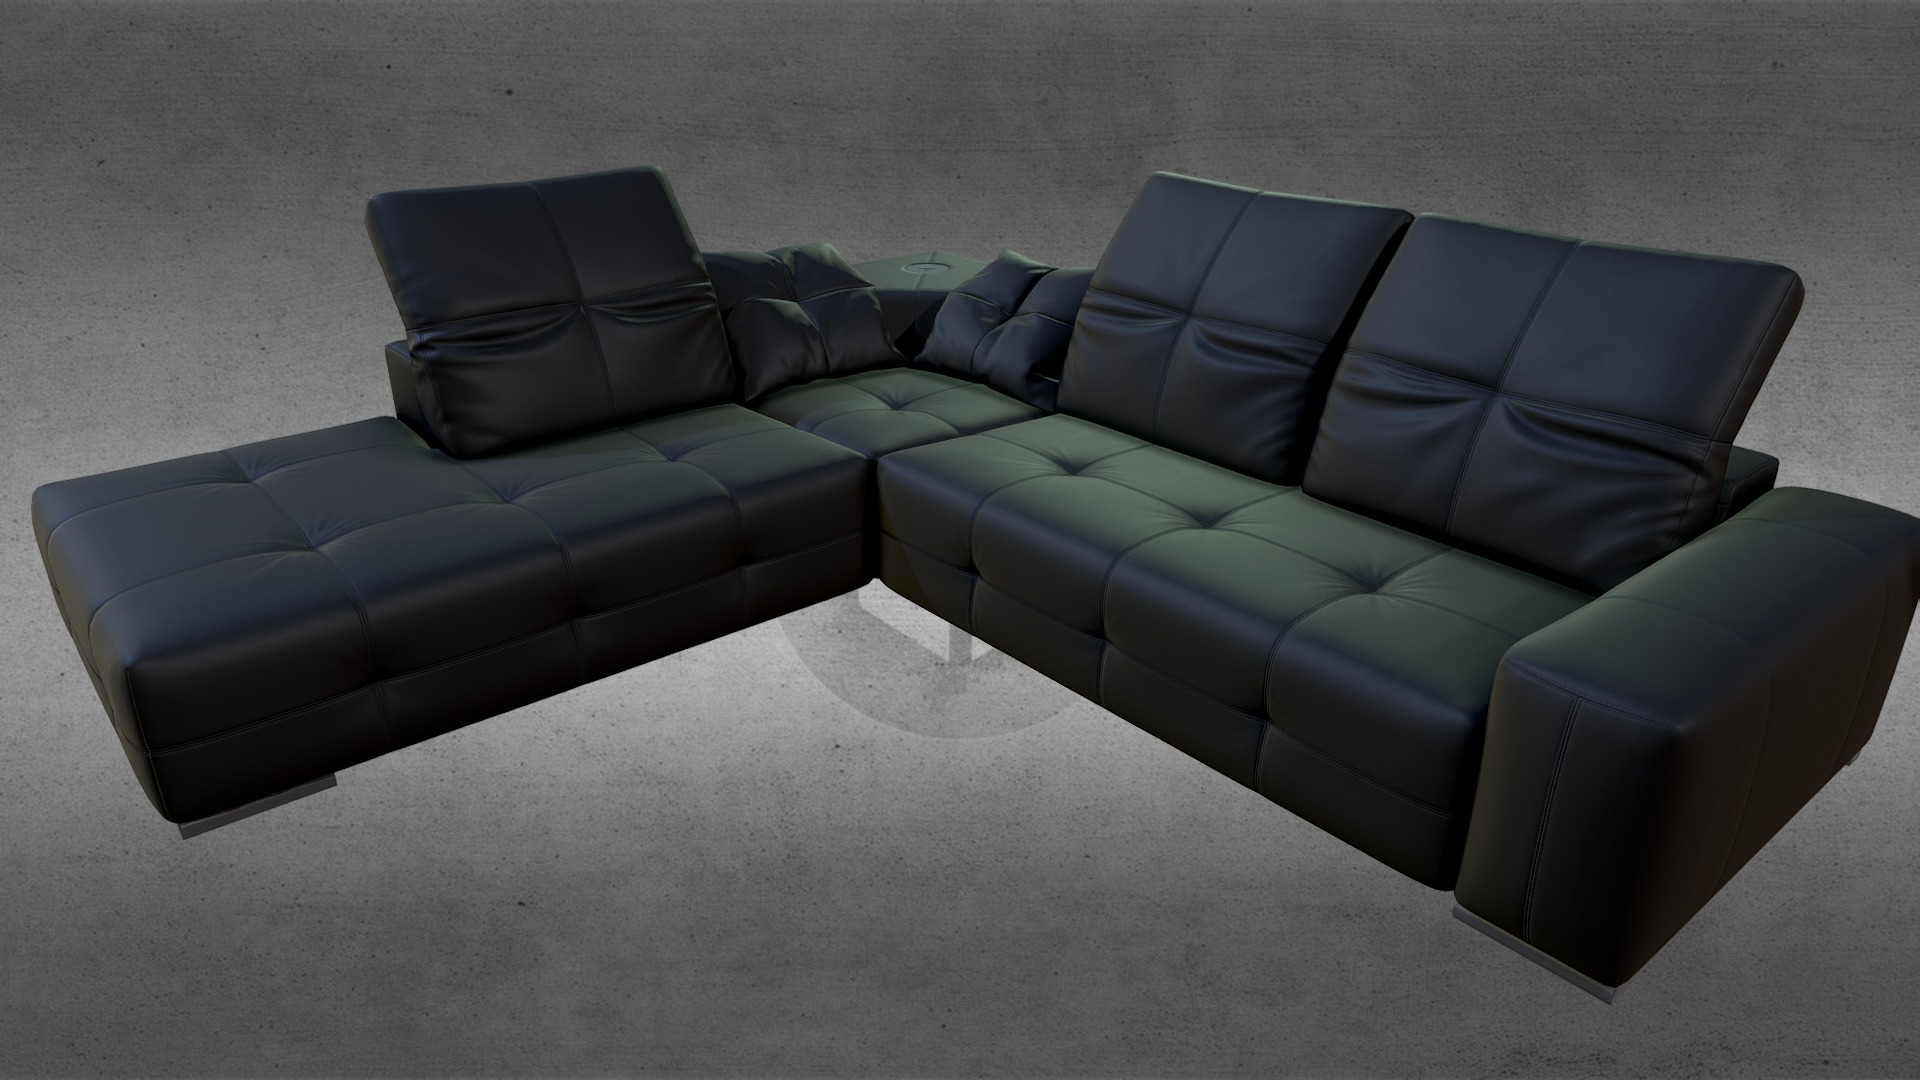 3D model Anim - This is a 3D model of the Anim. The 3D model is about a black couch with a grey cushion.